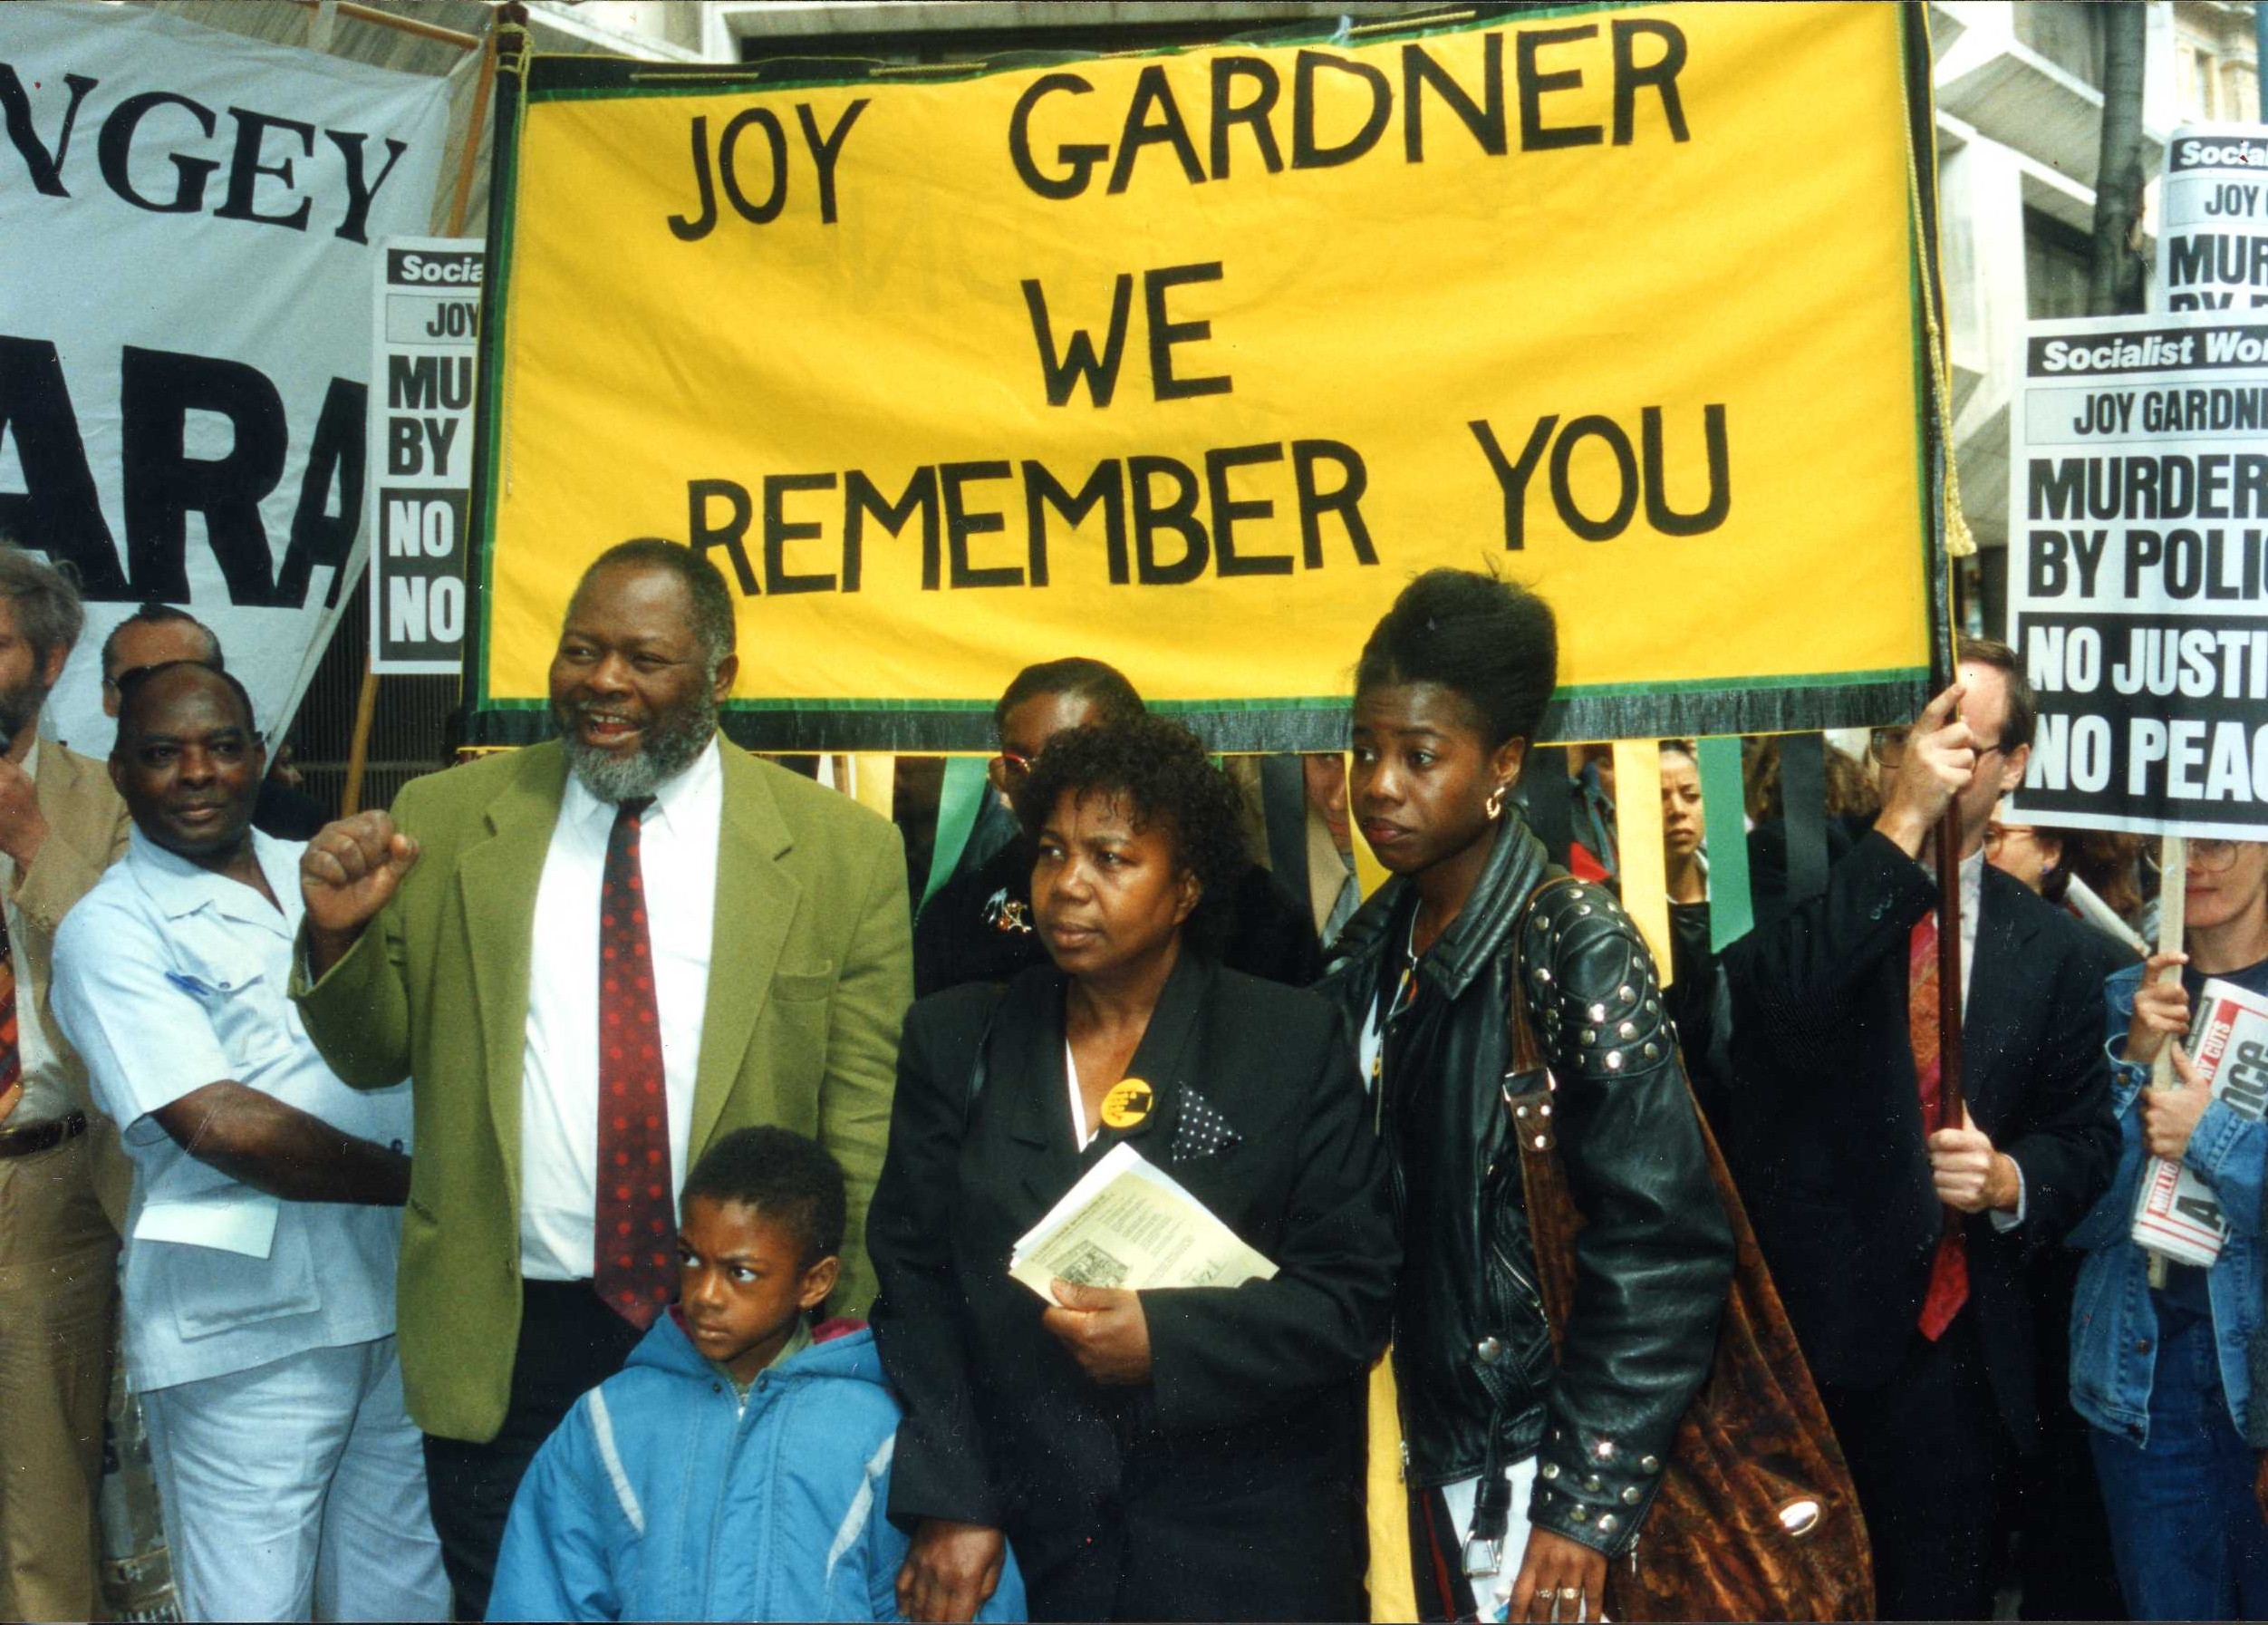 Photograph of a protest against the death of Joy Gardner, ca. 1993. Image credit: Bernie Grant Archive/Bishopsgate Institute.